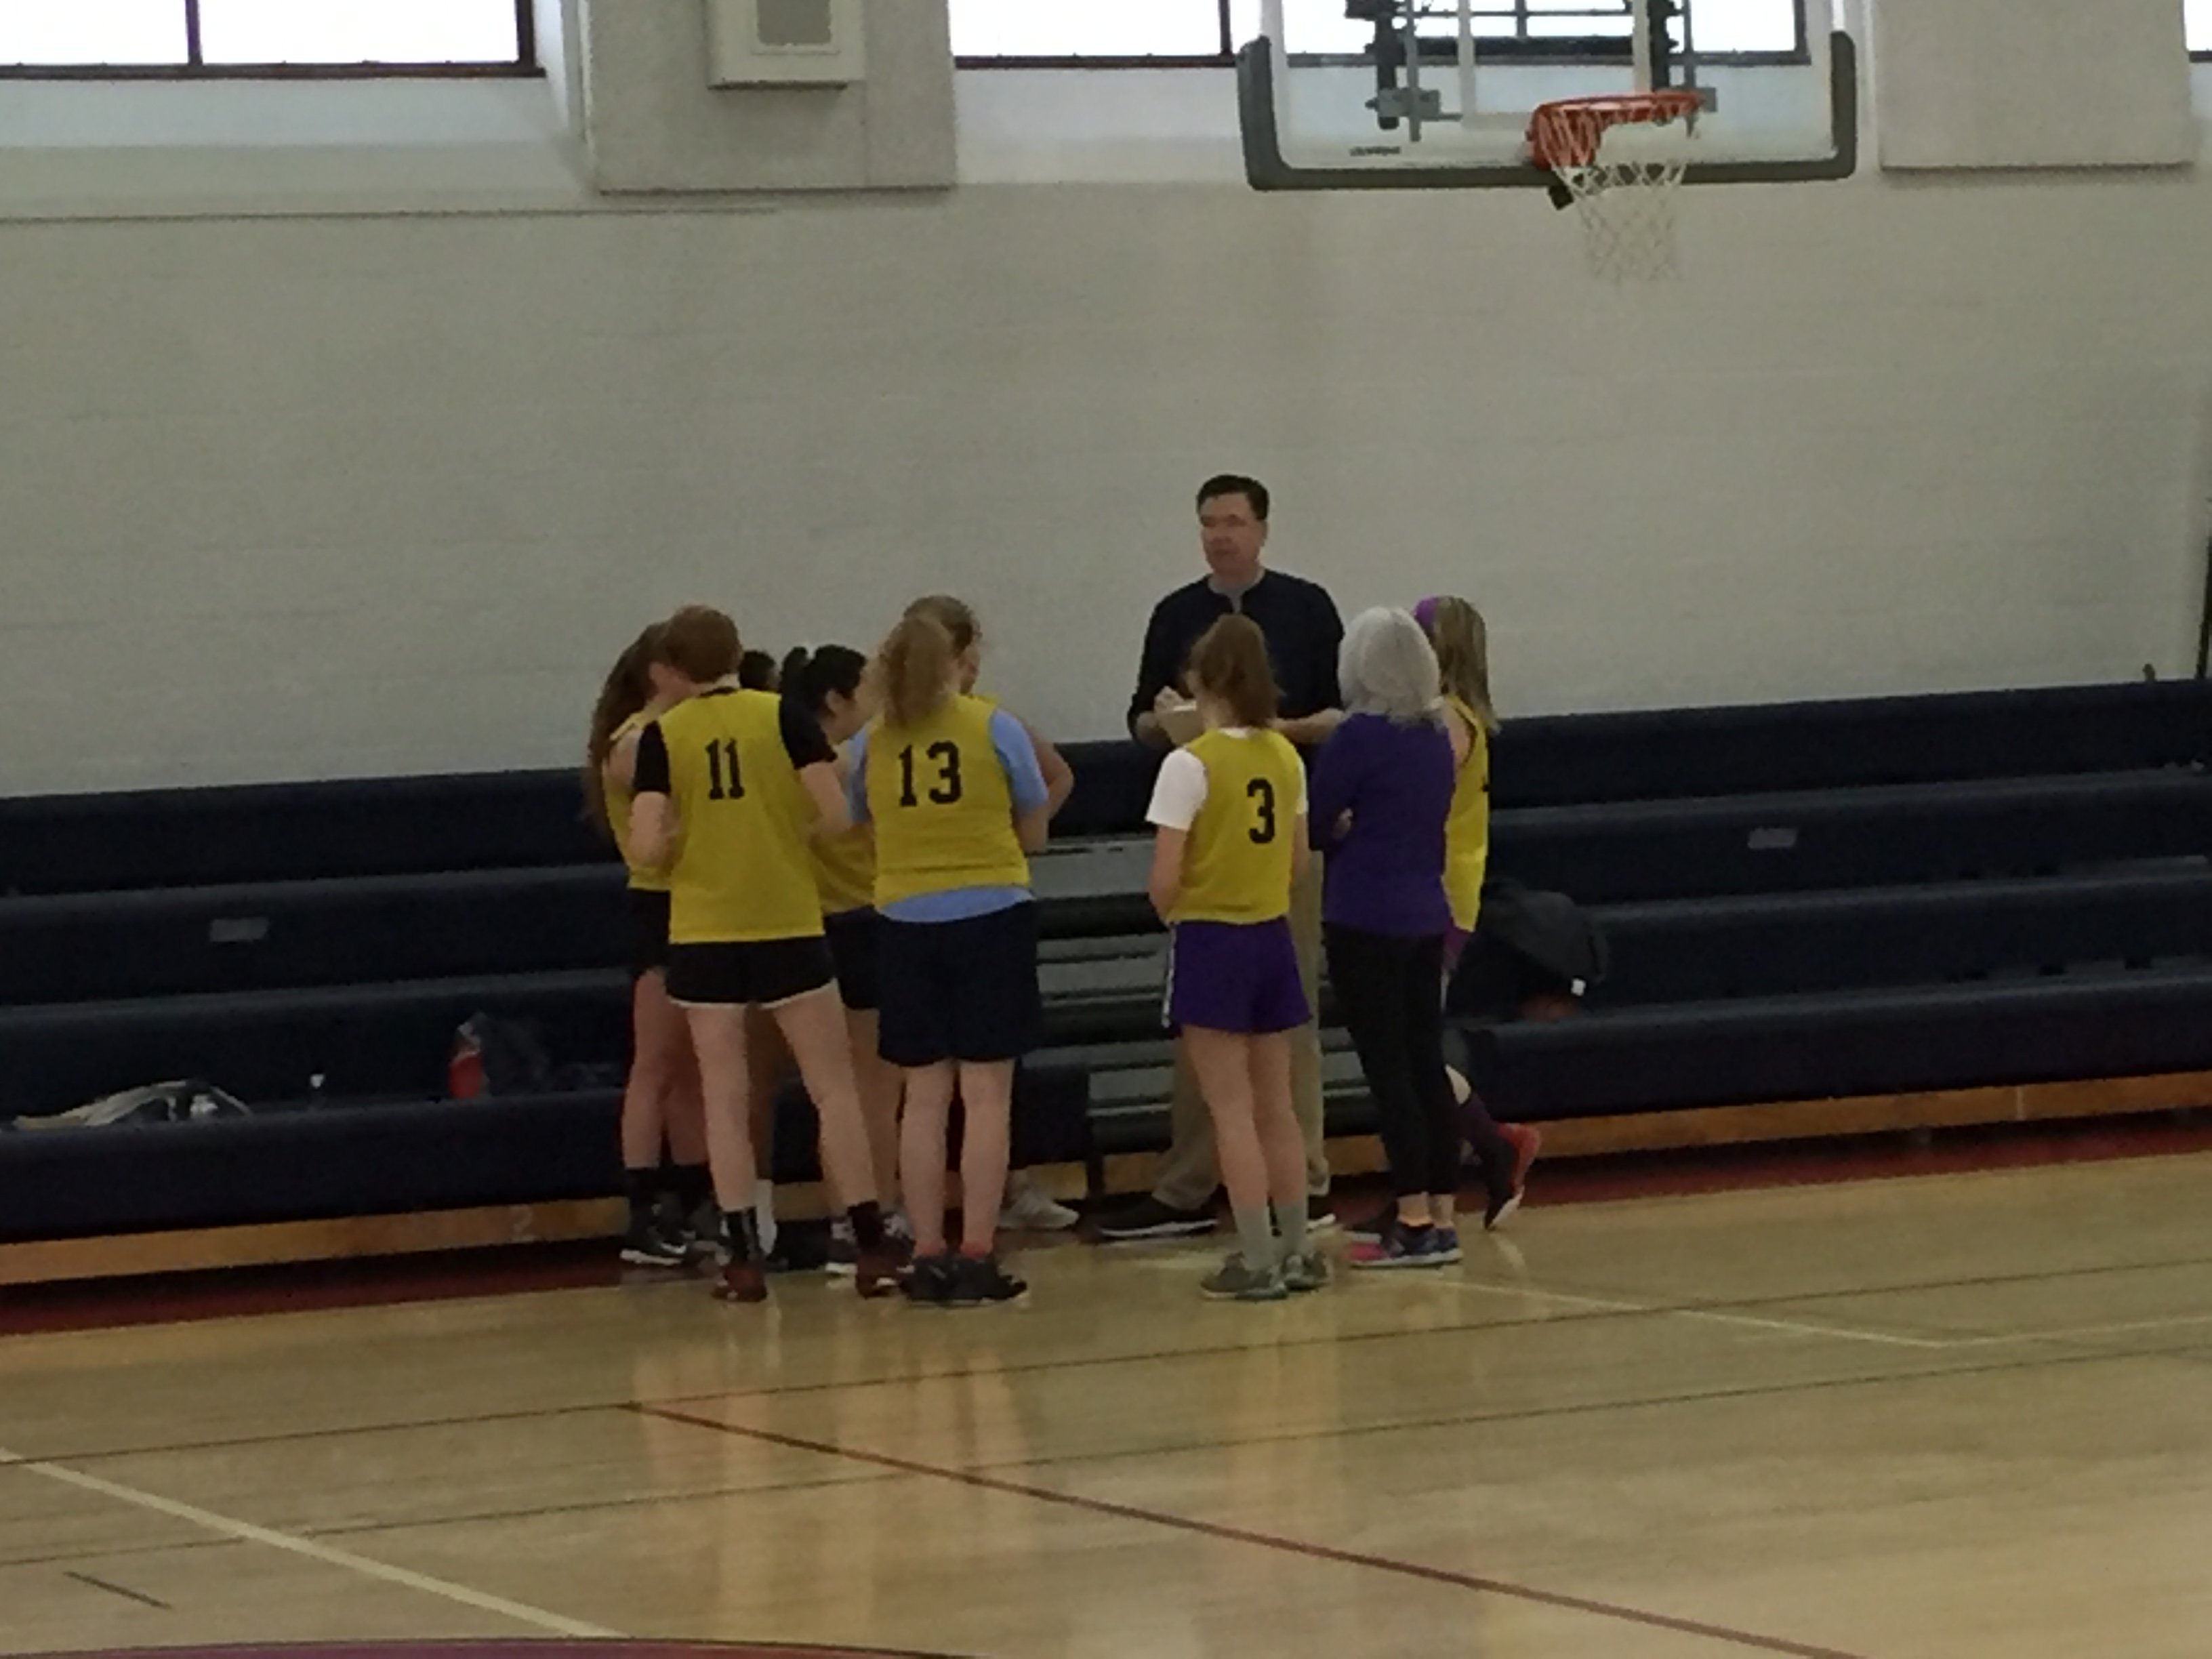 Amber Duke (Athey) on X: "Y'ALL spotted former FBI director Comey coaching youth basketball and it was EVERYTHING. https://t.co/RfIST7JC7D https://t.co/djxXtGH6KK" / X